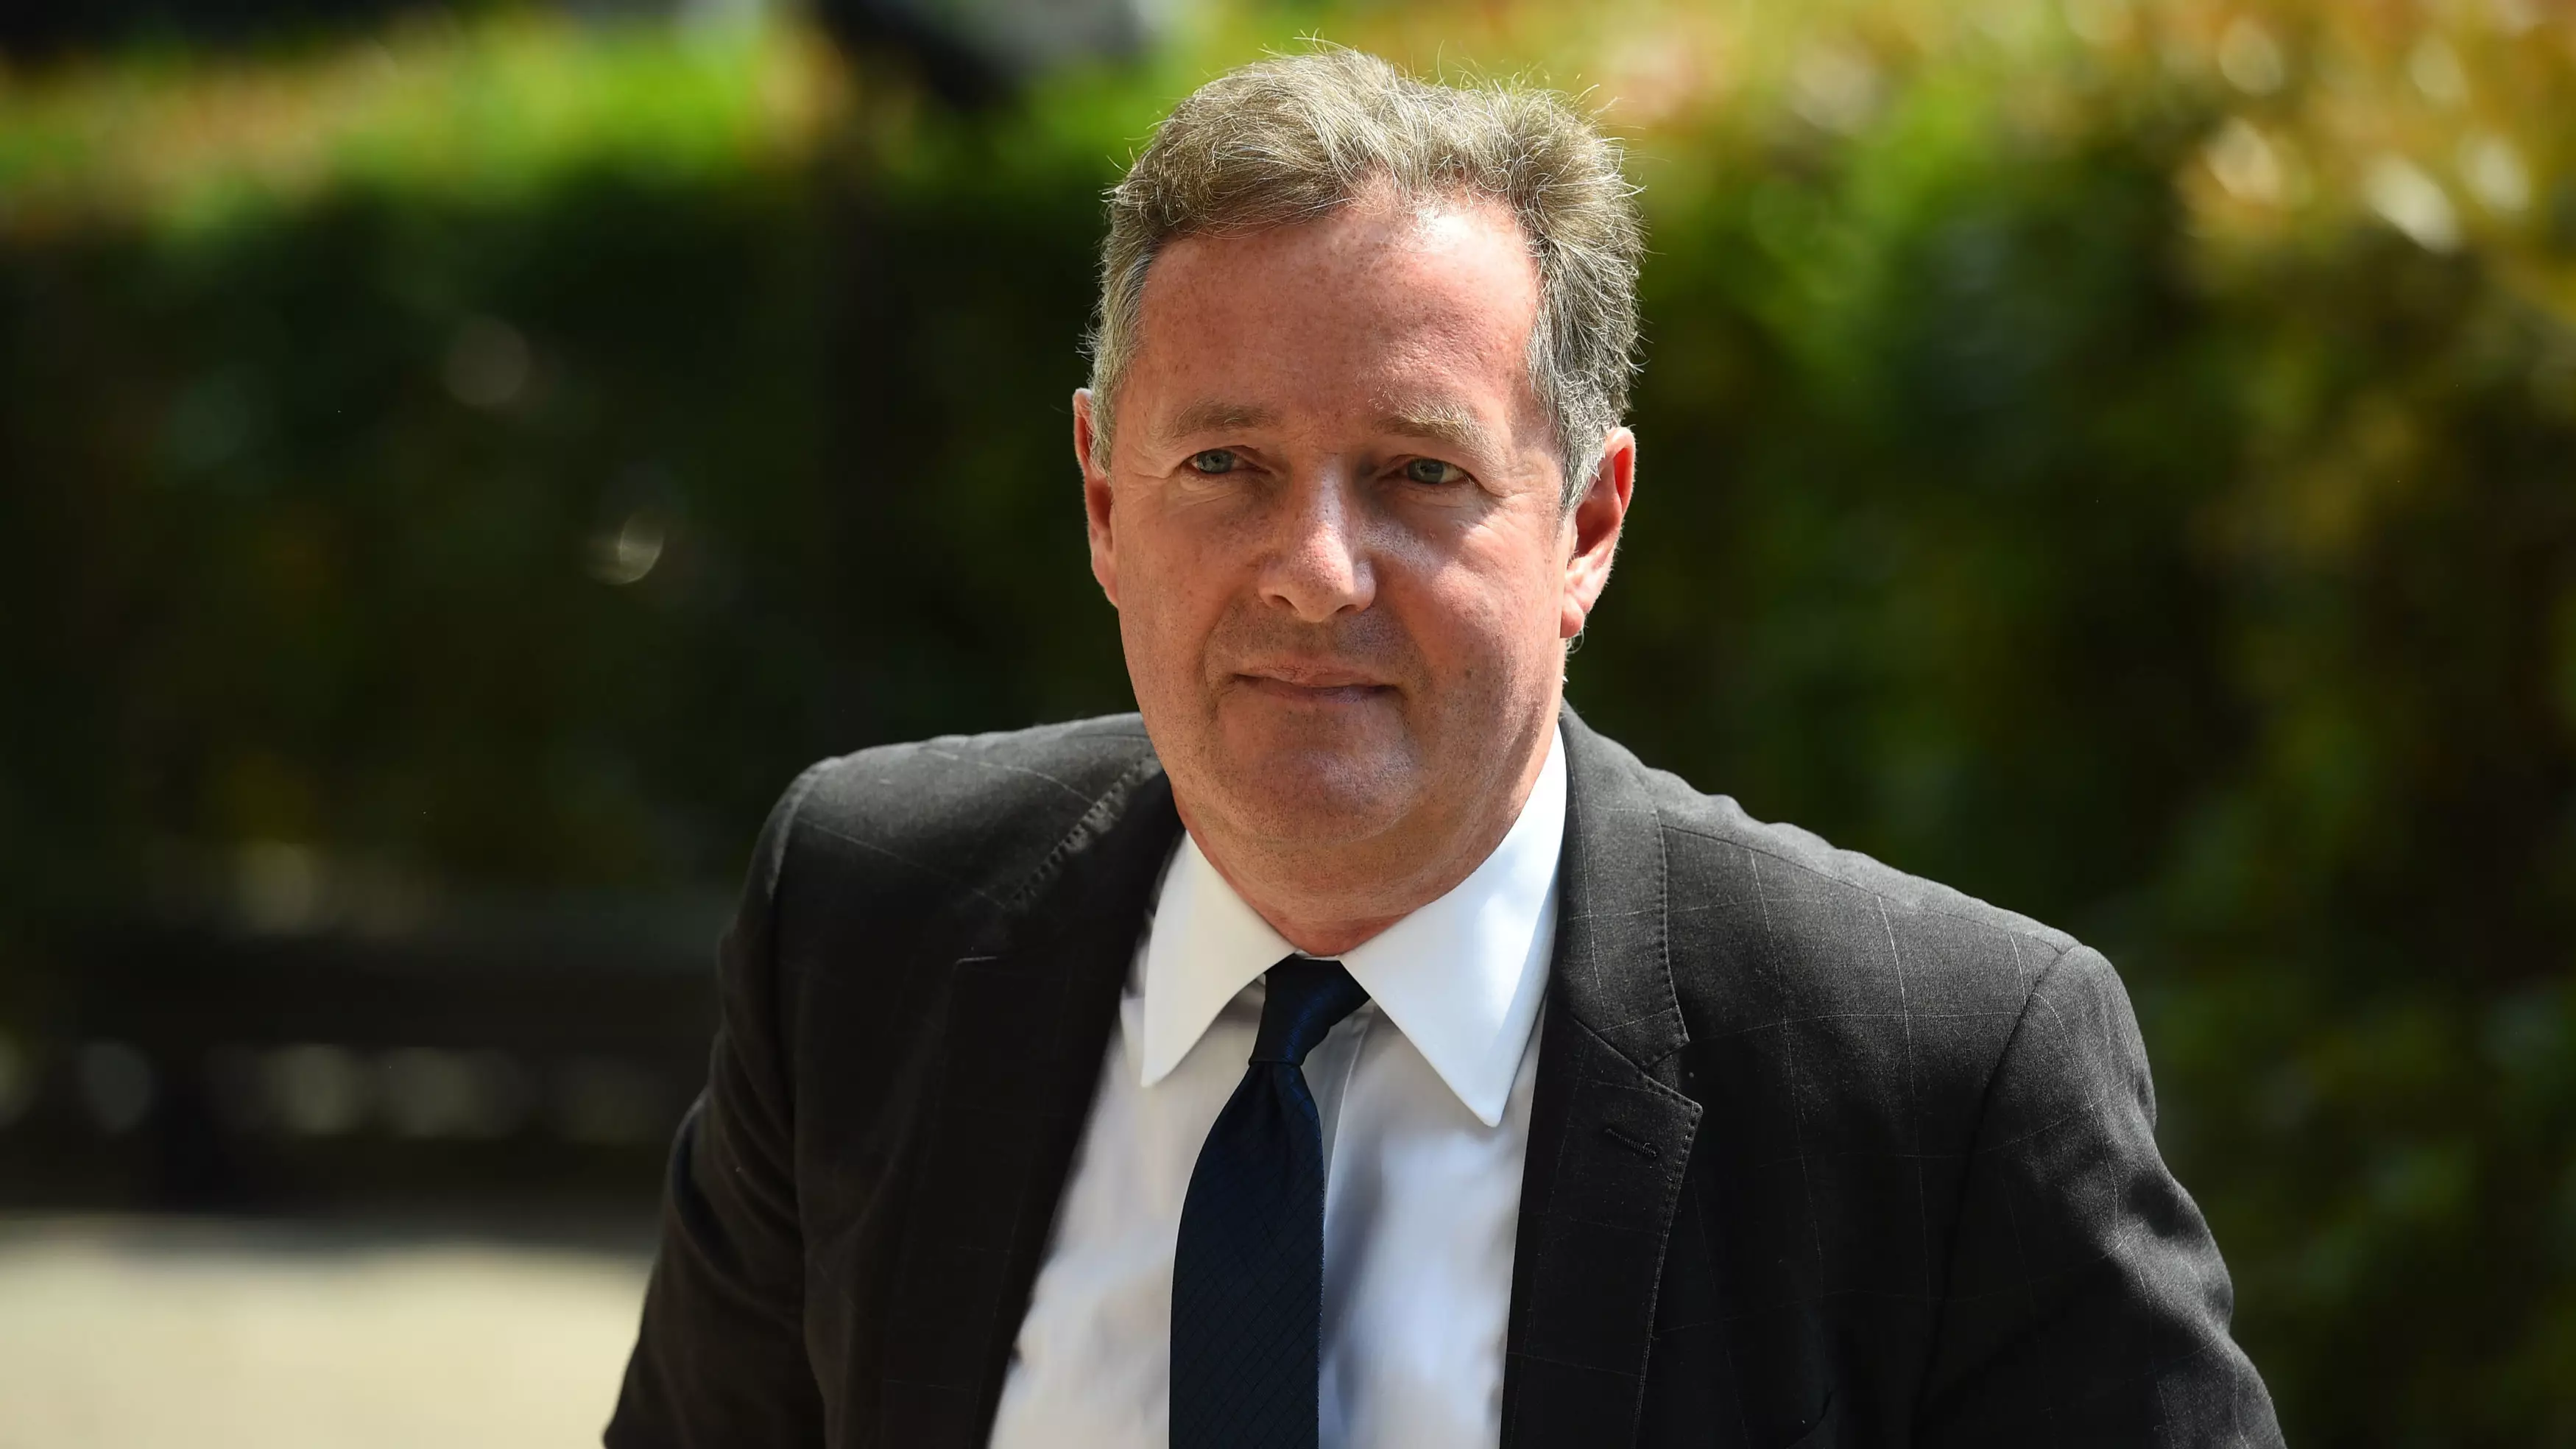 Piers Morgan Has Dubbed Boris Johnson's Speech 'Disingenuous' And A 'Total Waste Of Time'